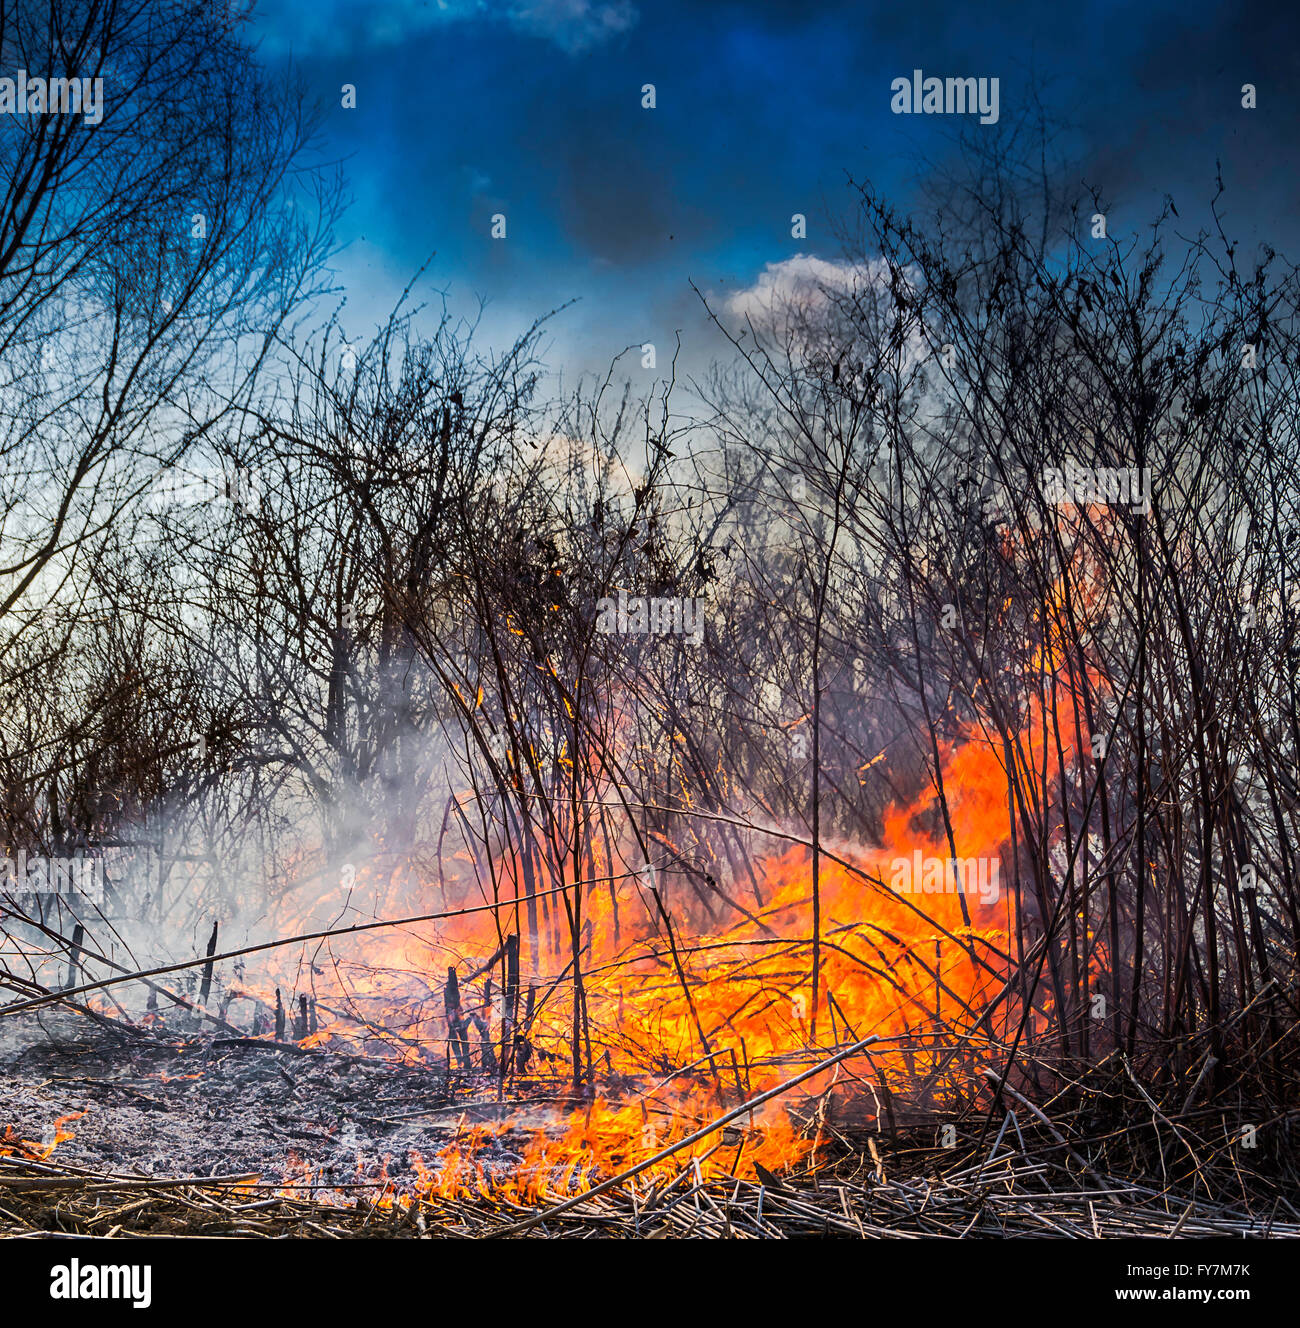 Wildfire burning the dry vegetation in the field with the flames and smoke rising to the sky. Stock Photo